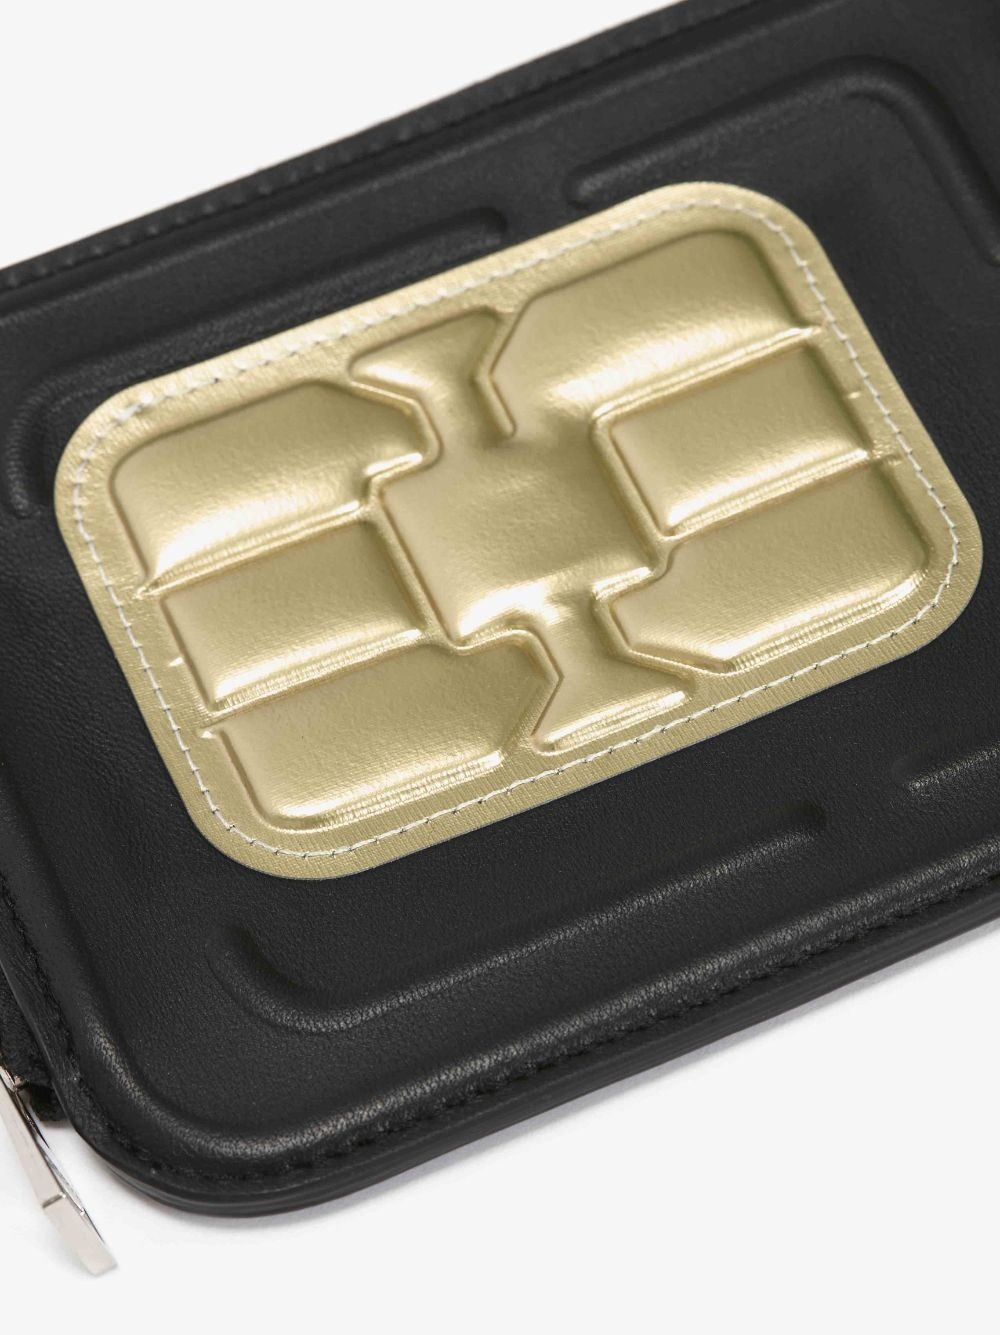 A4 LEATHER SIM CARD POUCH - 4